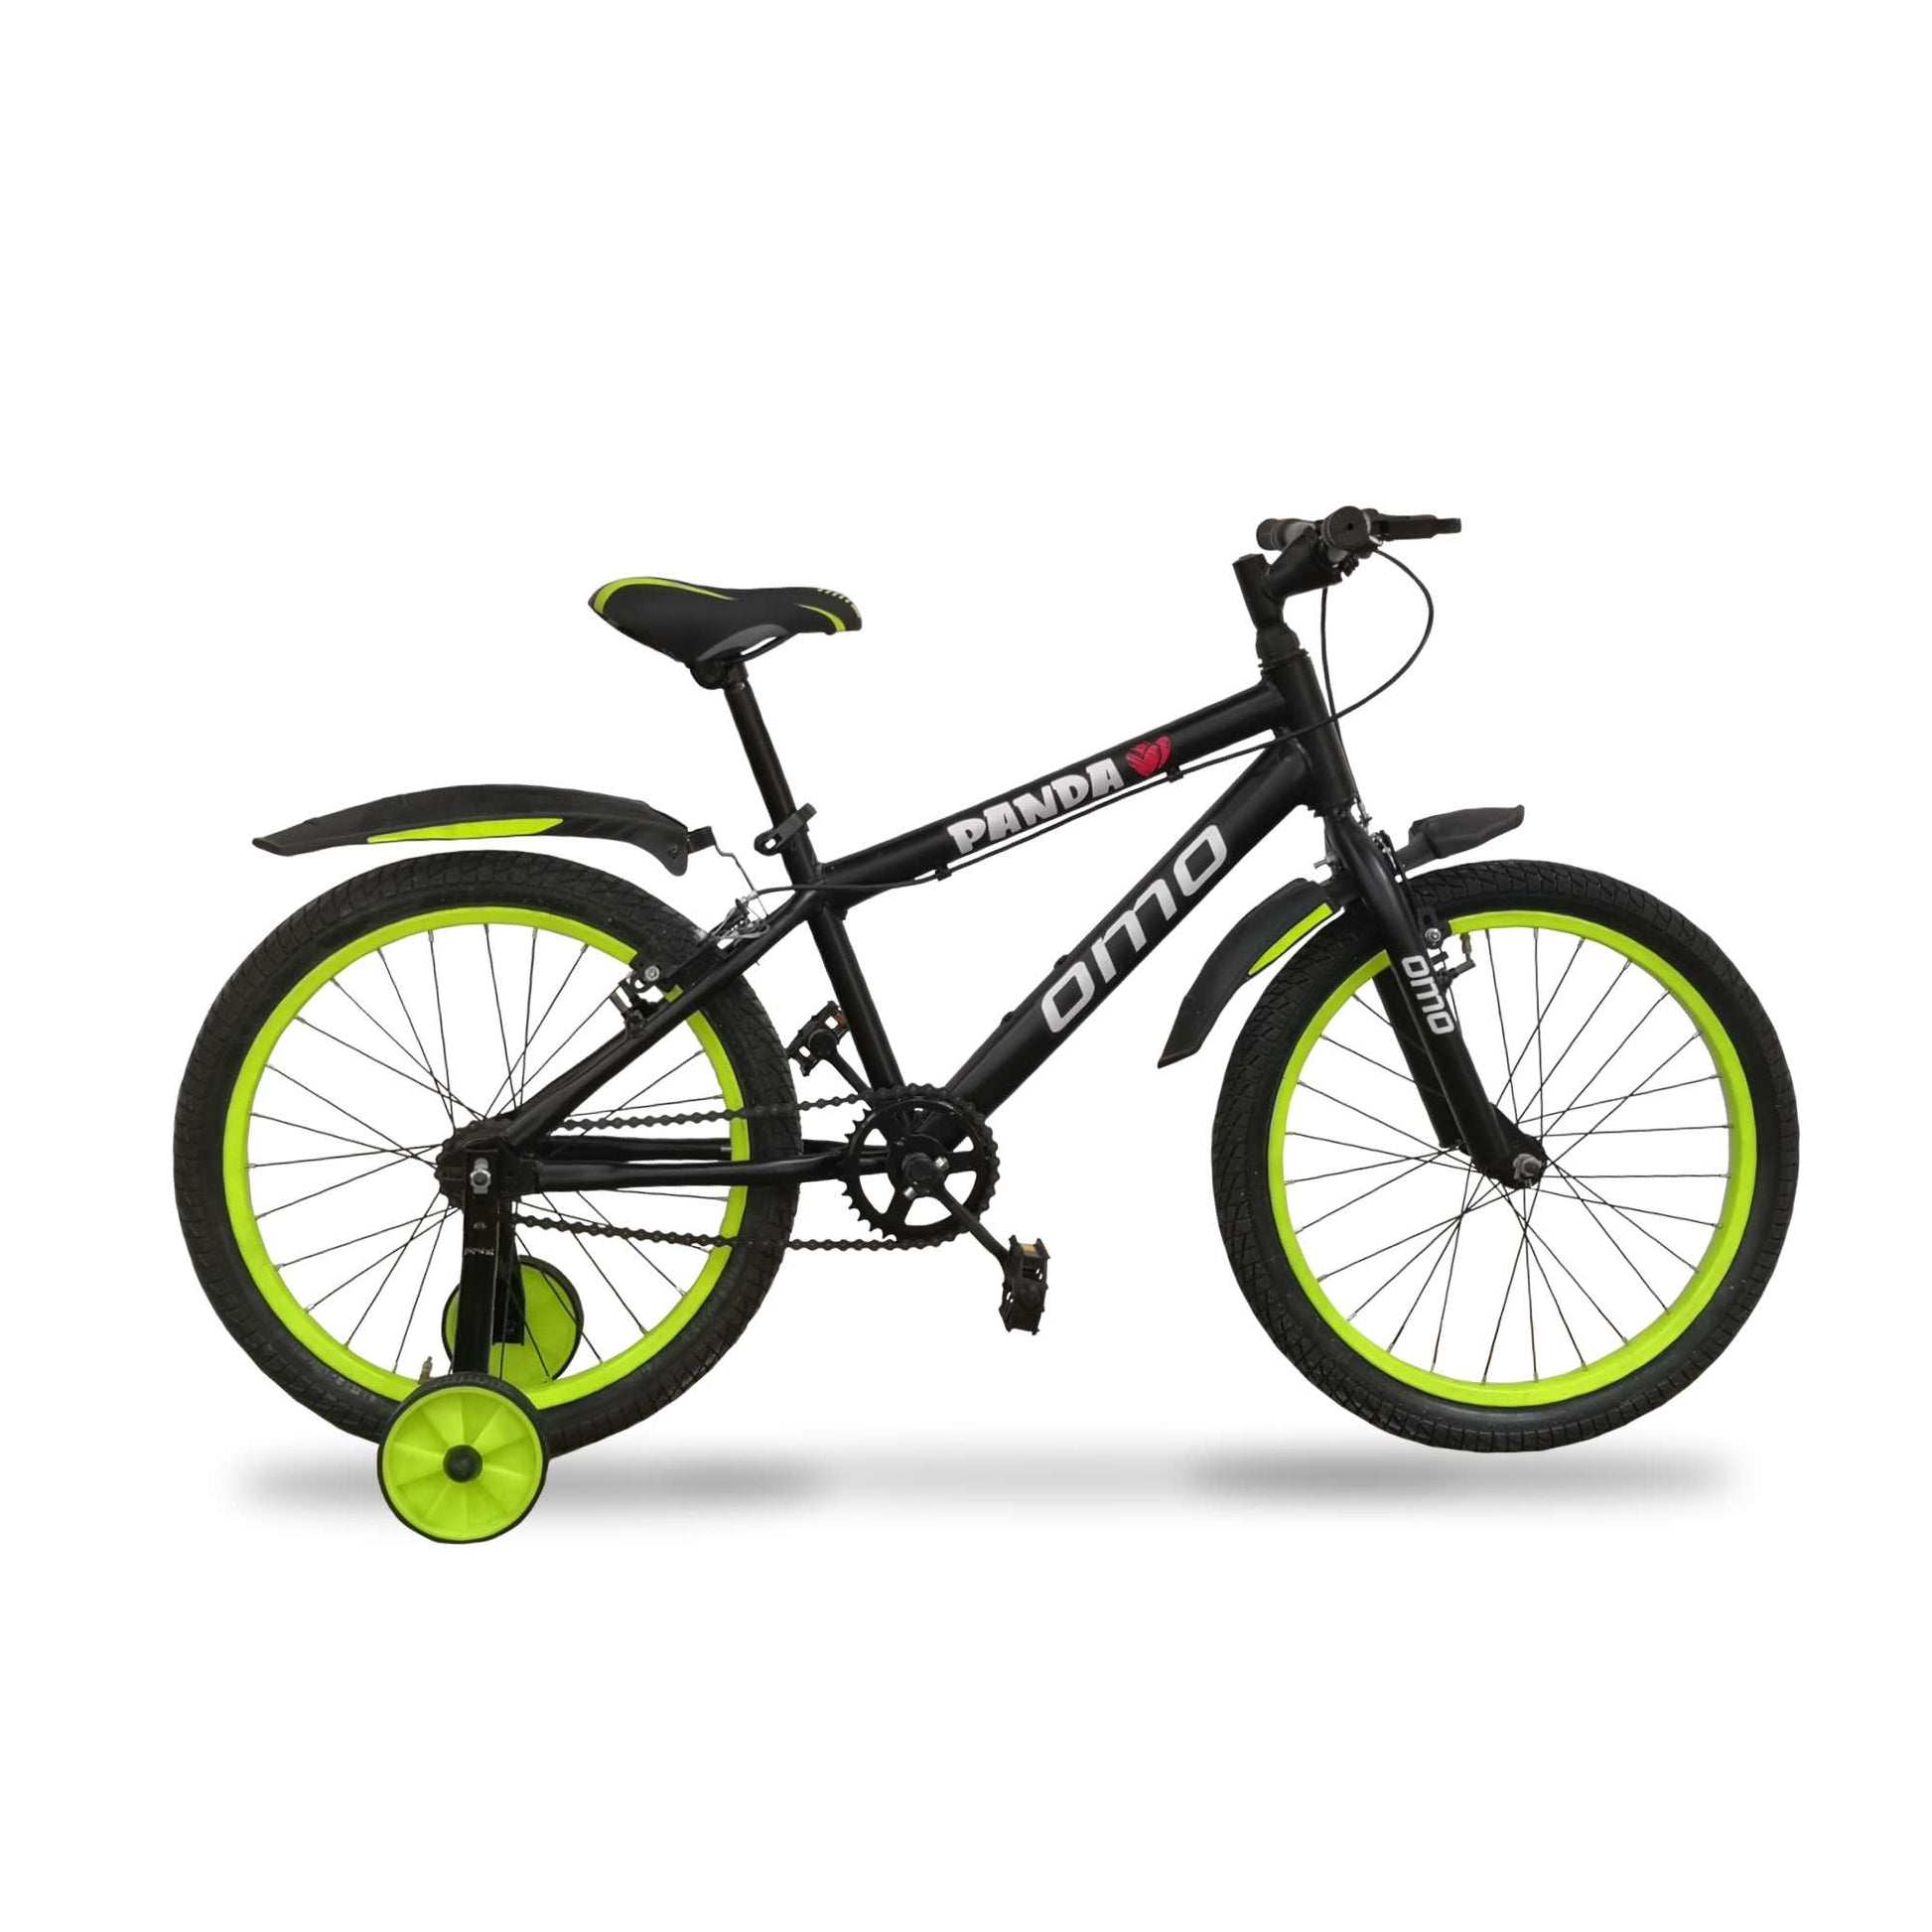 omobikes panda kids cycle 20 inch green color